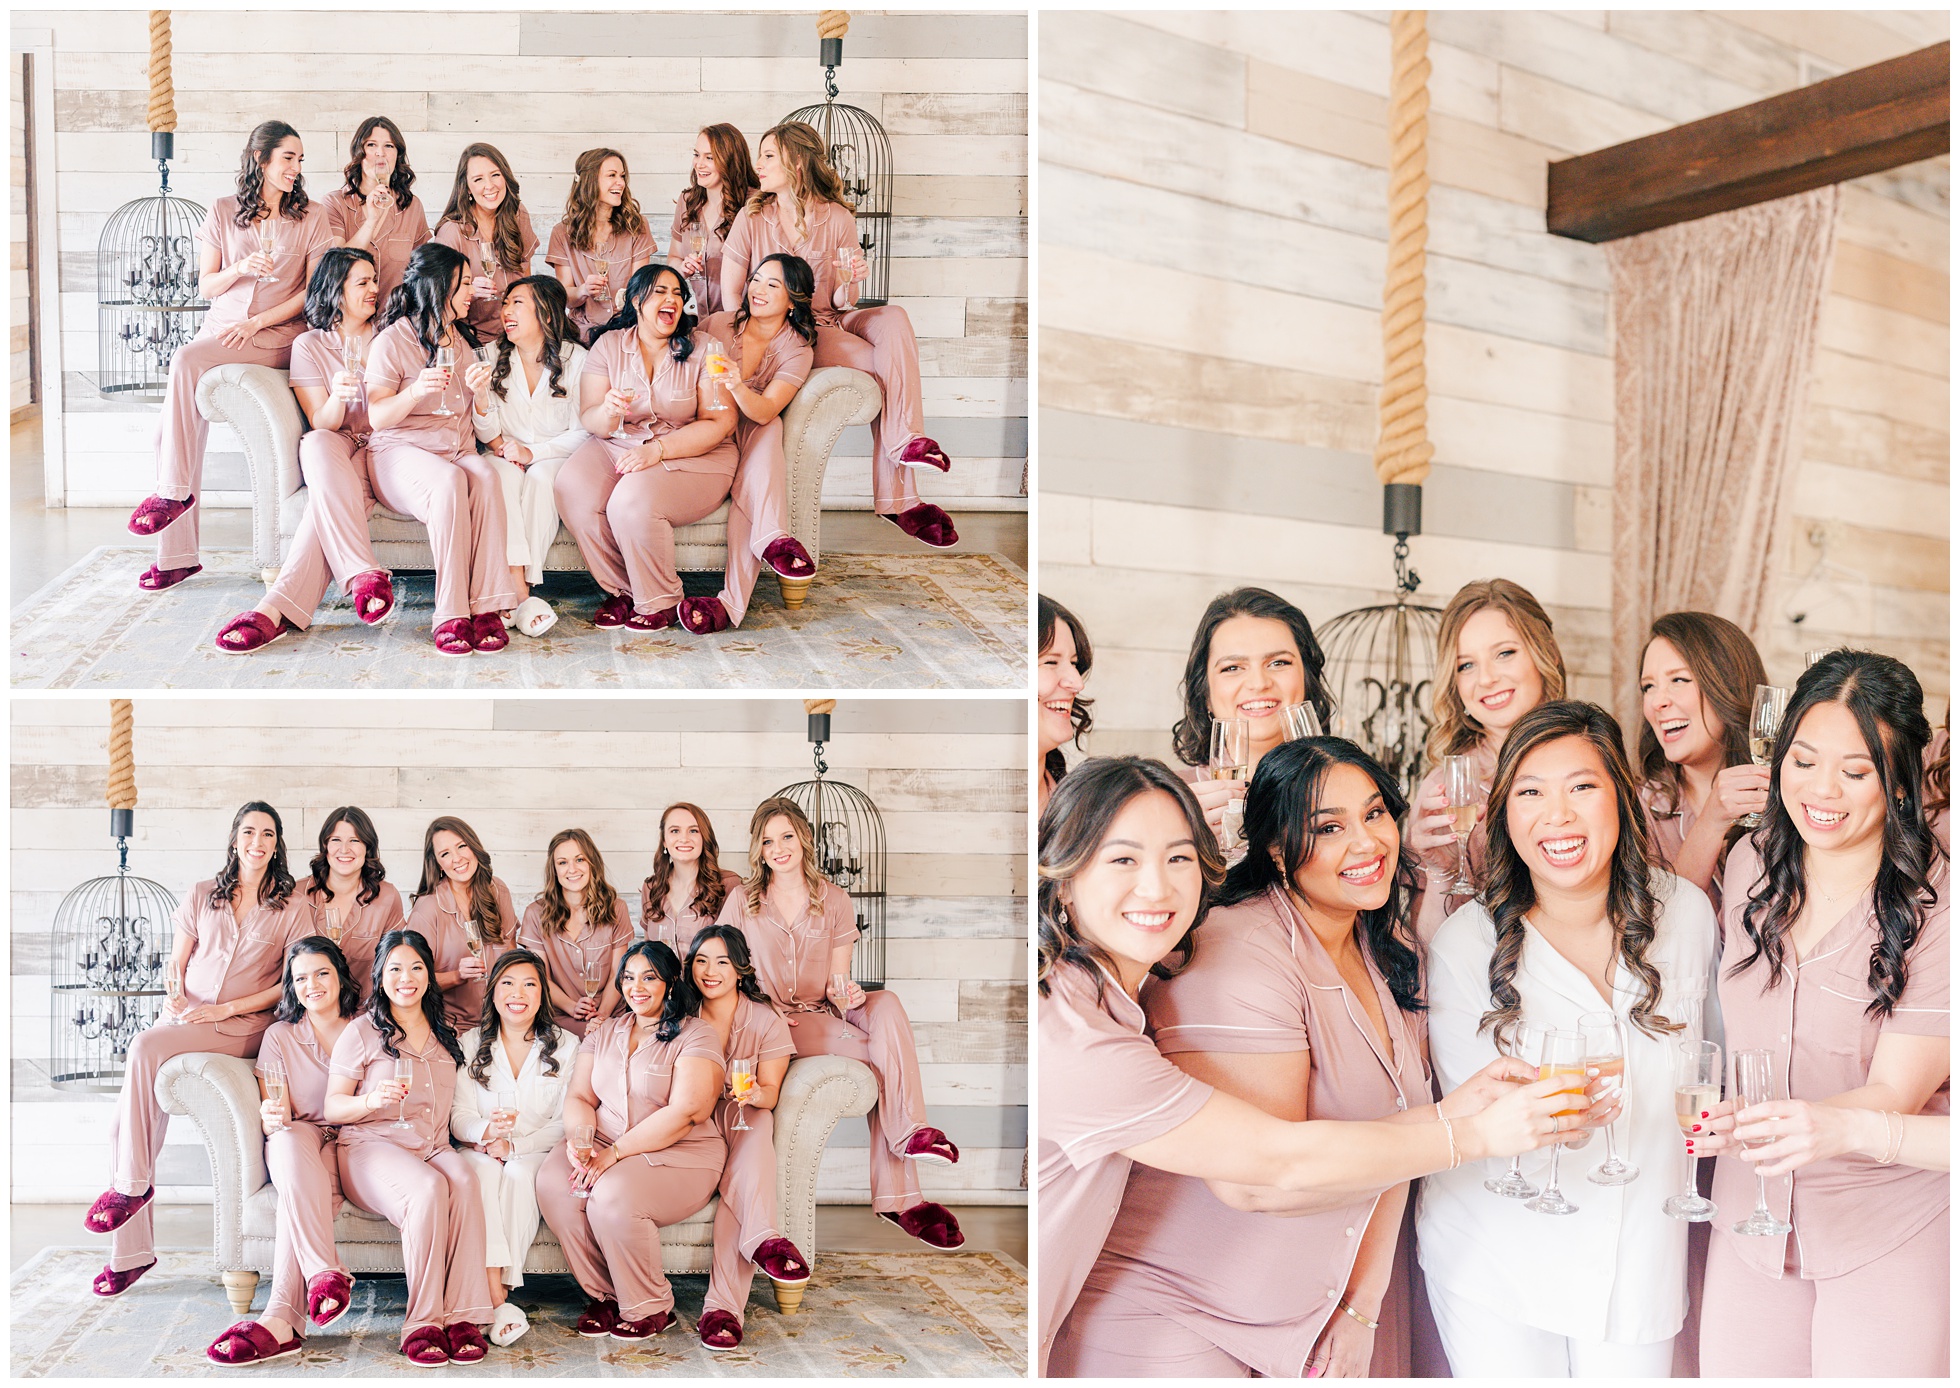 Bride and Bridesmaids drinking champagne in pjs in the bridal suite at Big Sky Barn.